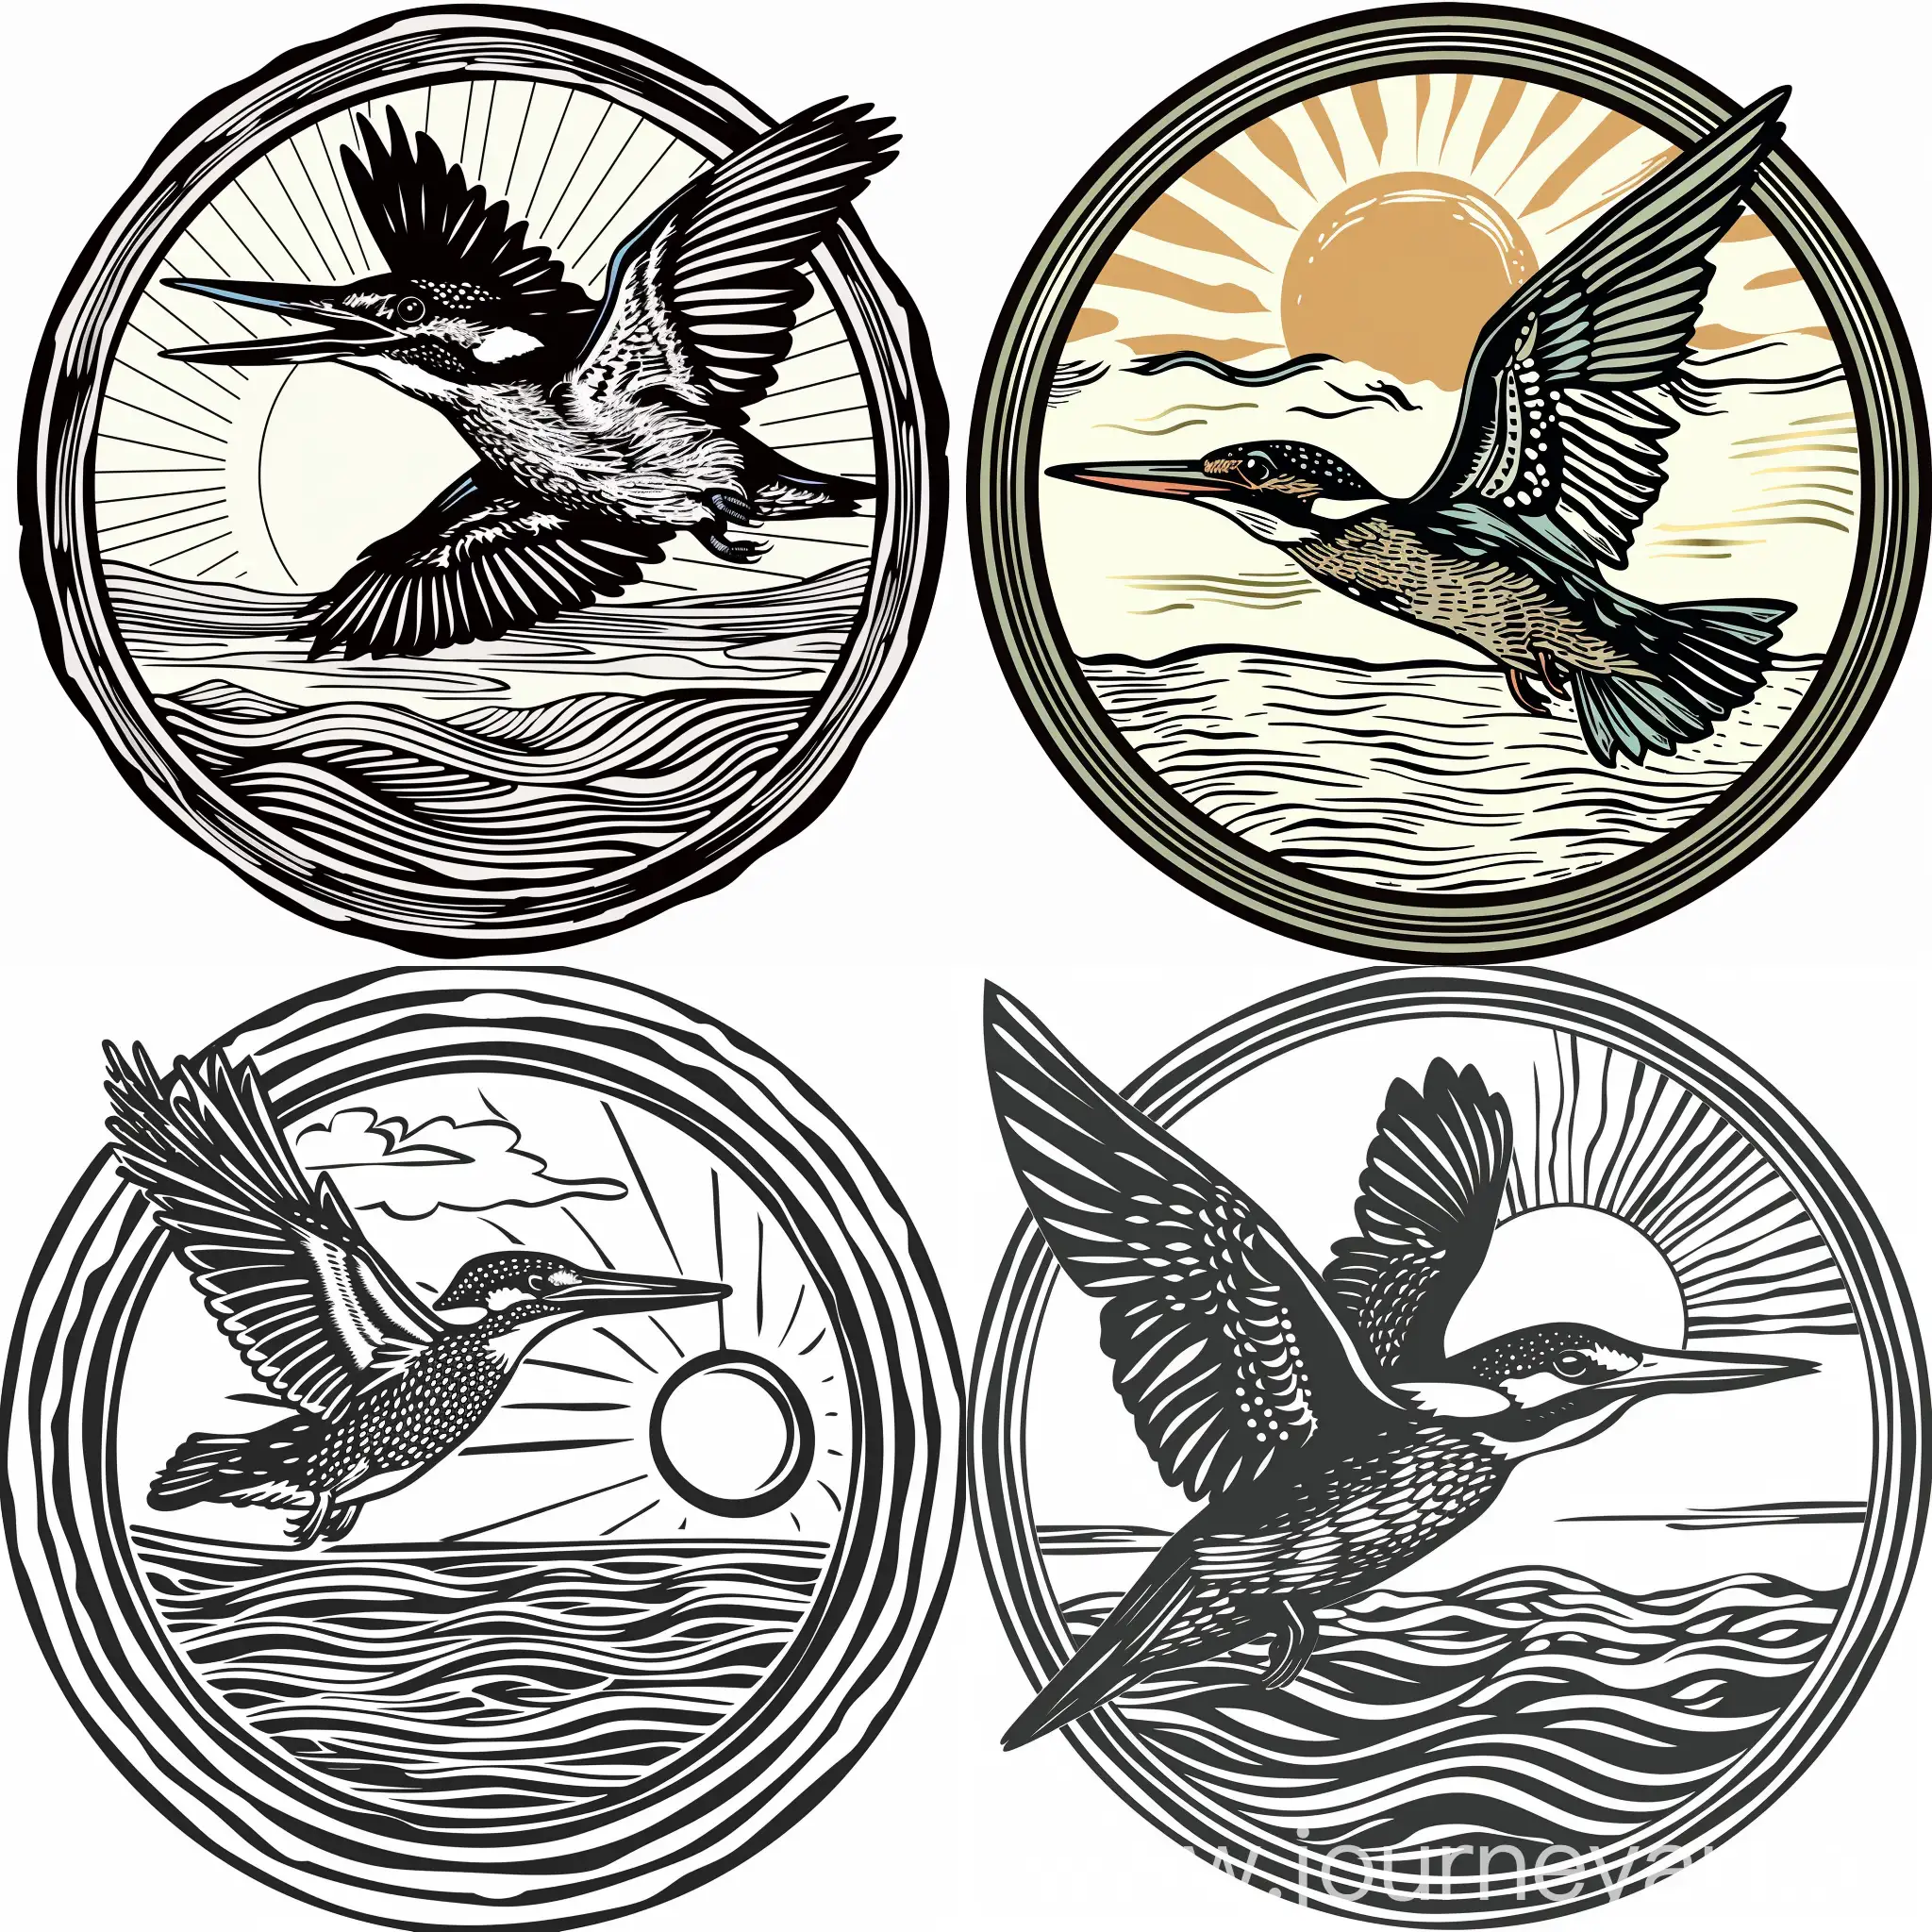 Flying Kingfisher bird, sun and wavy river in background, framed in a circle, woodcut style